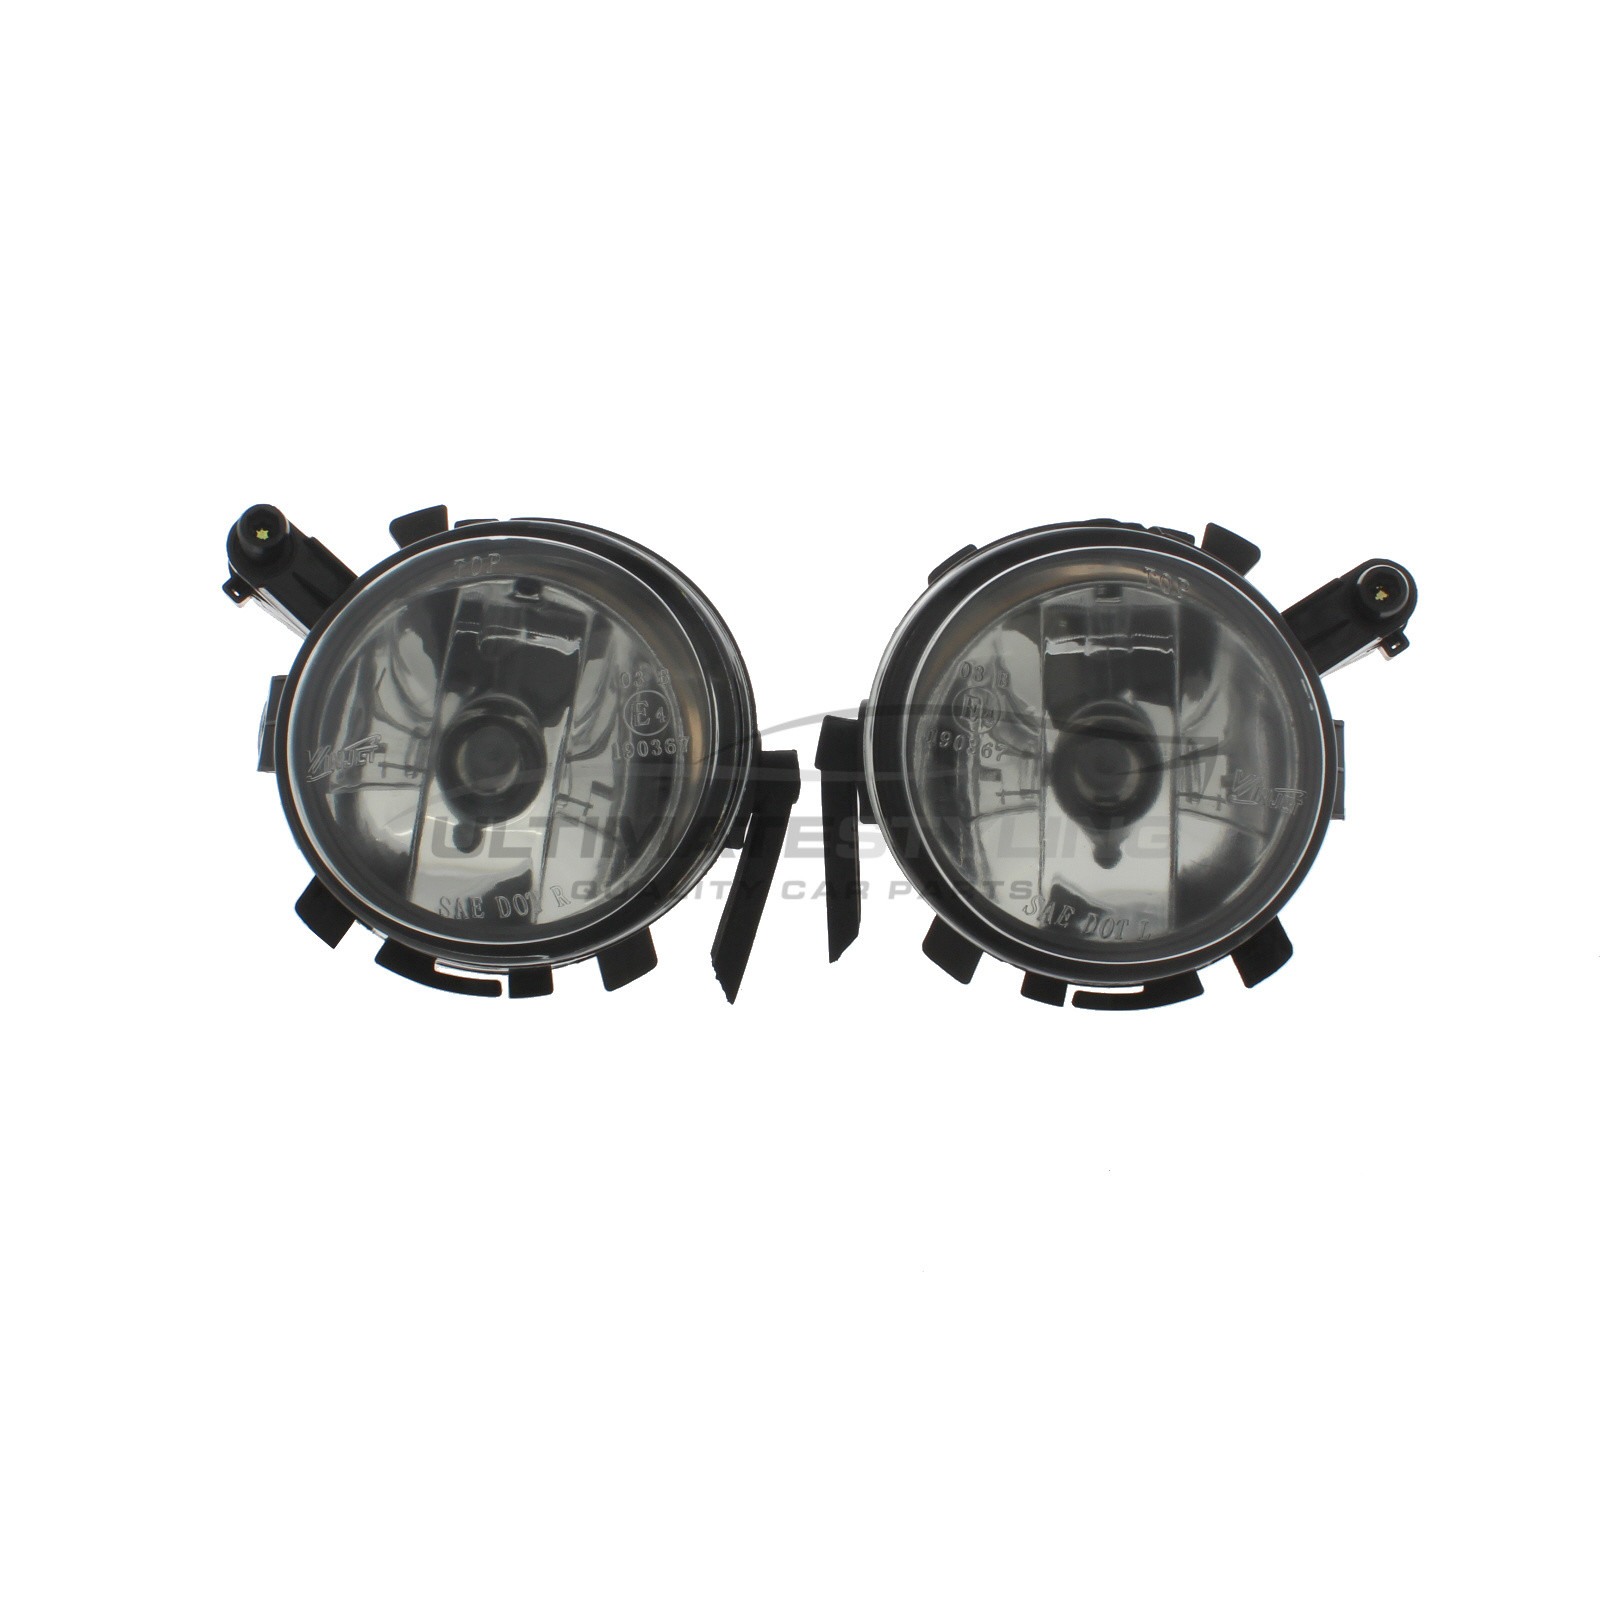 Front Fog Lights (Pair) for Seat Leon